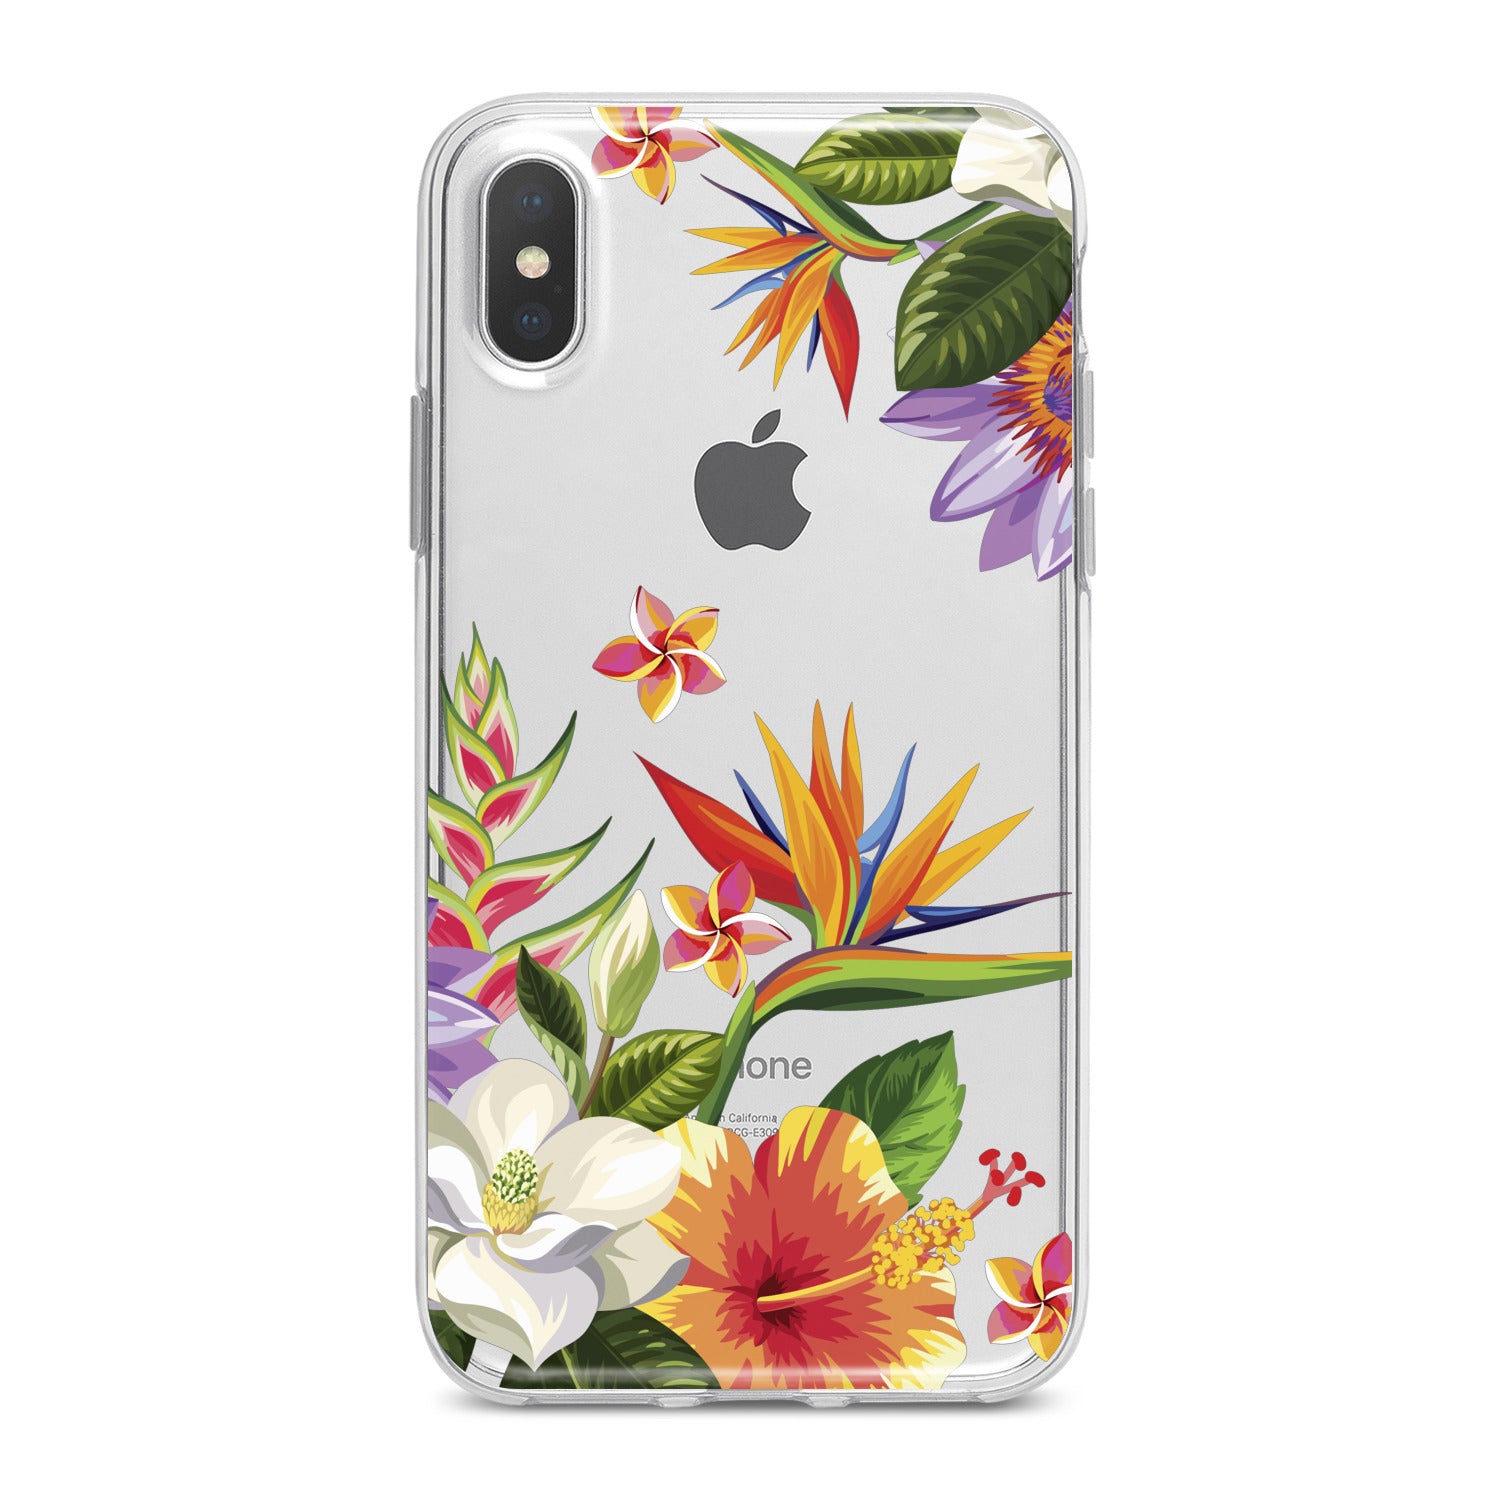 Lex Altern Colorful Flowers Art Phone Case for your iPhone & Android phone.